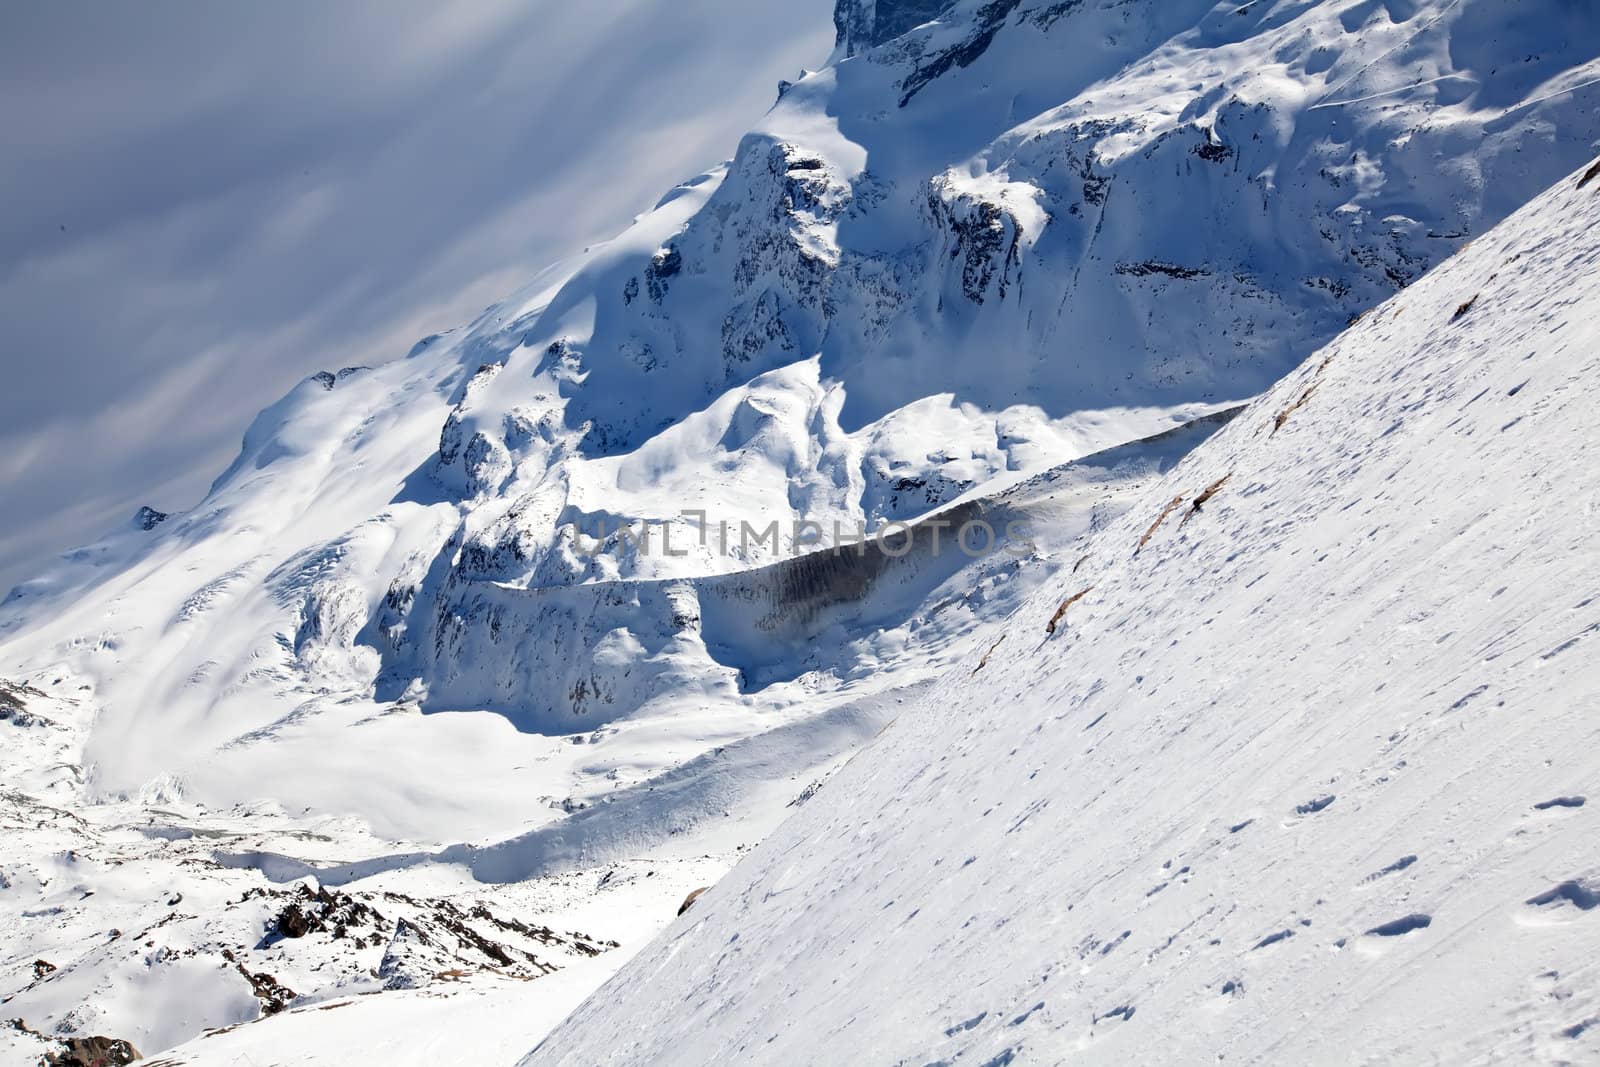 Winter snow mountain landscape by RawGroup